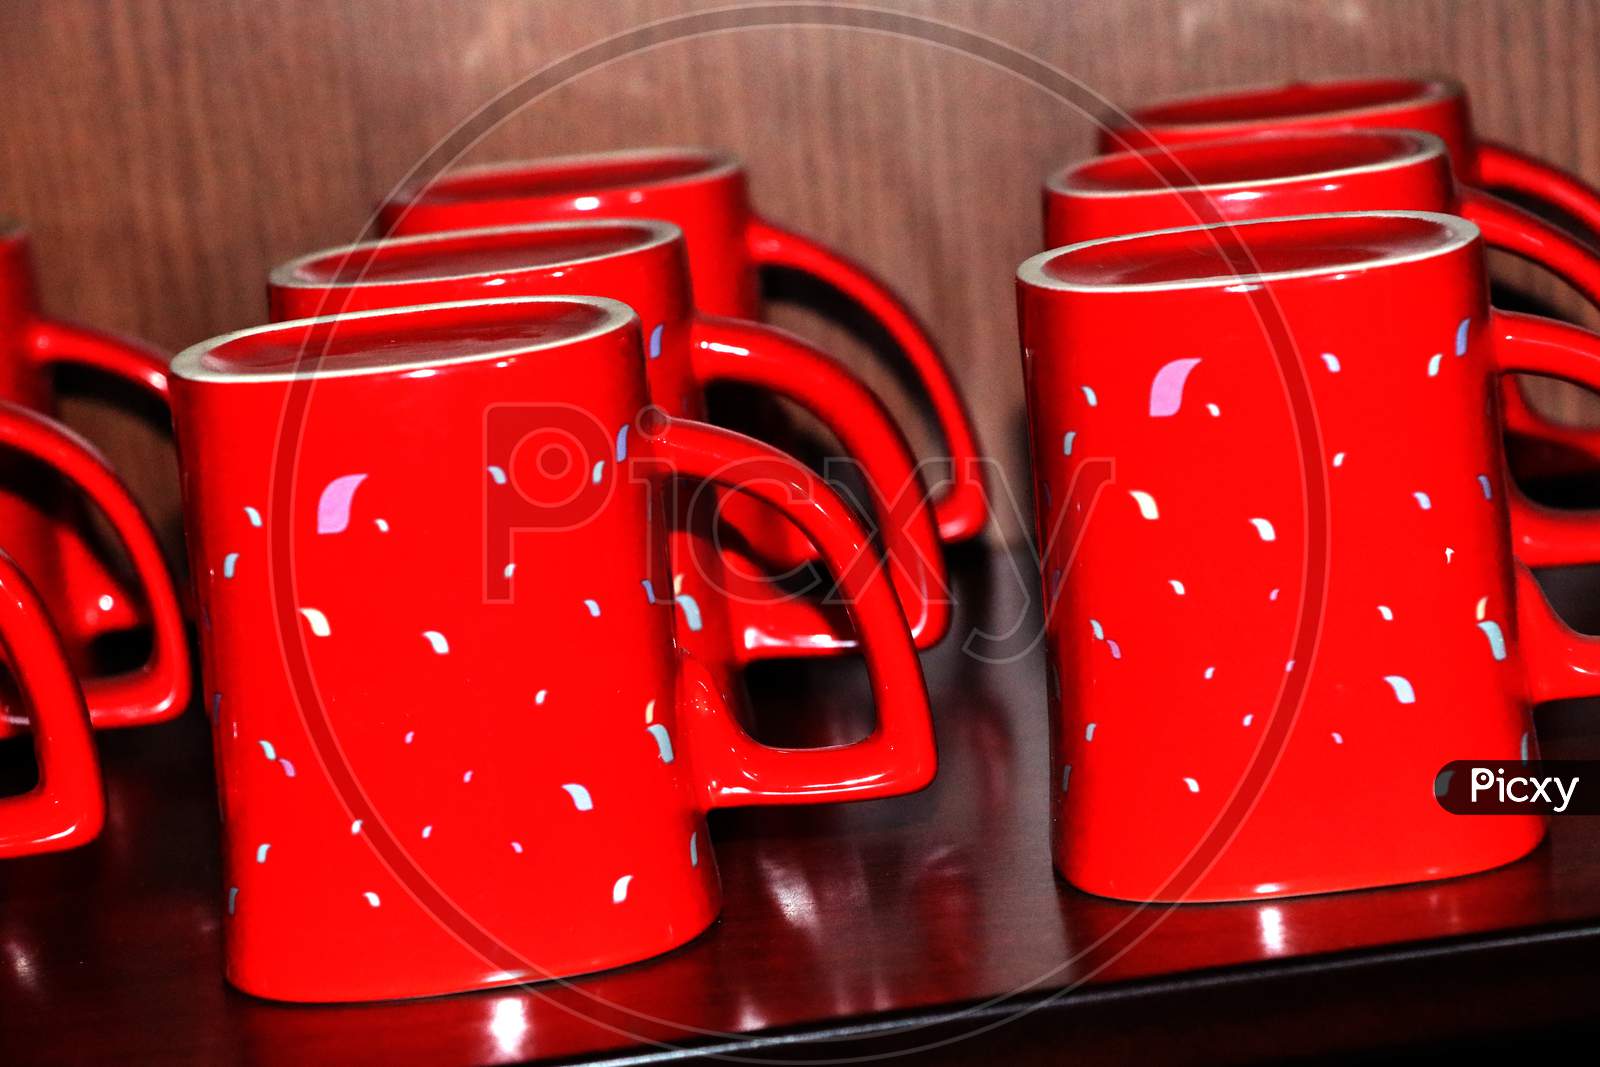 Red color coffee mug for the refreshment is waiting at showcase